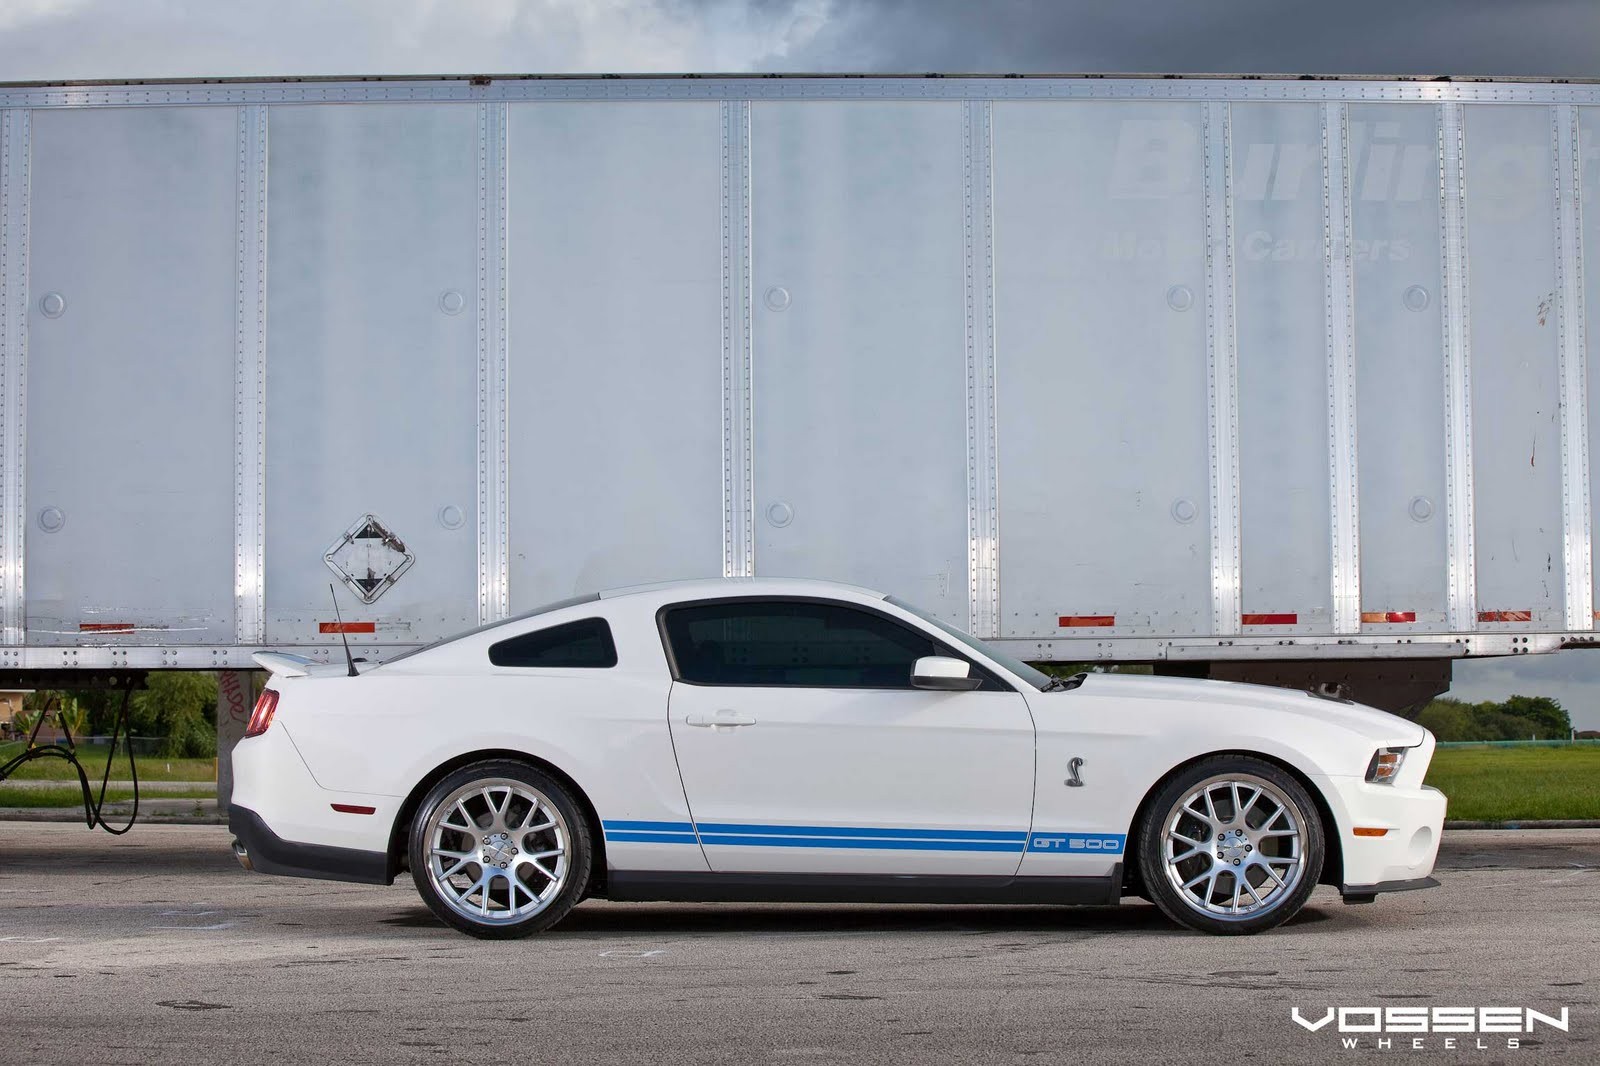 General 1600x1066 car Ford Ford Mustang vehicle white cars Ford Mustang S-197 II muscle cars American cars Vossen